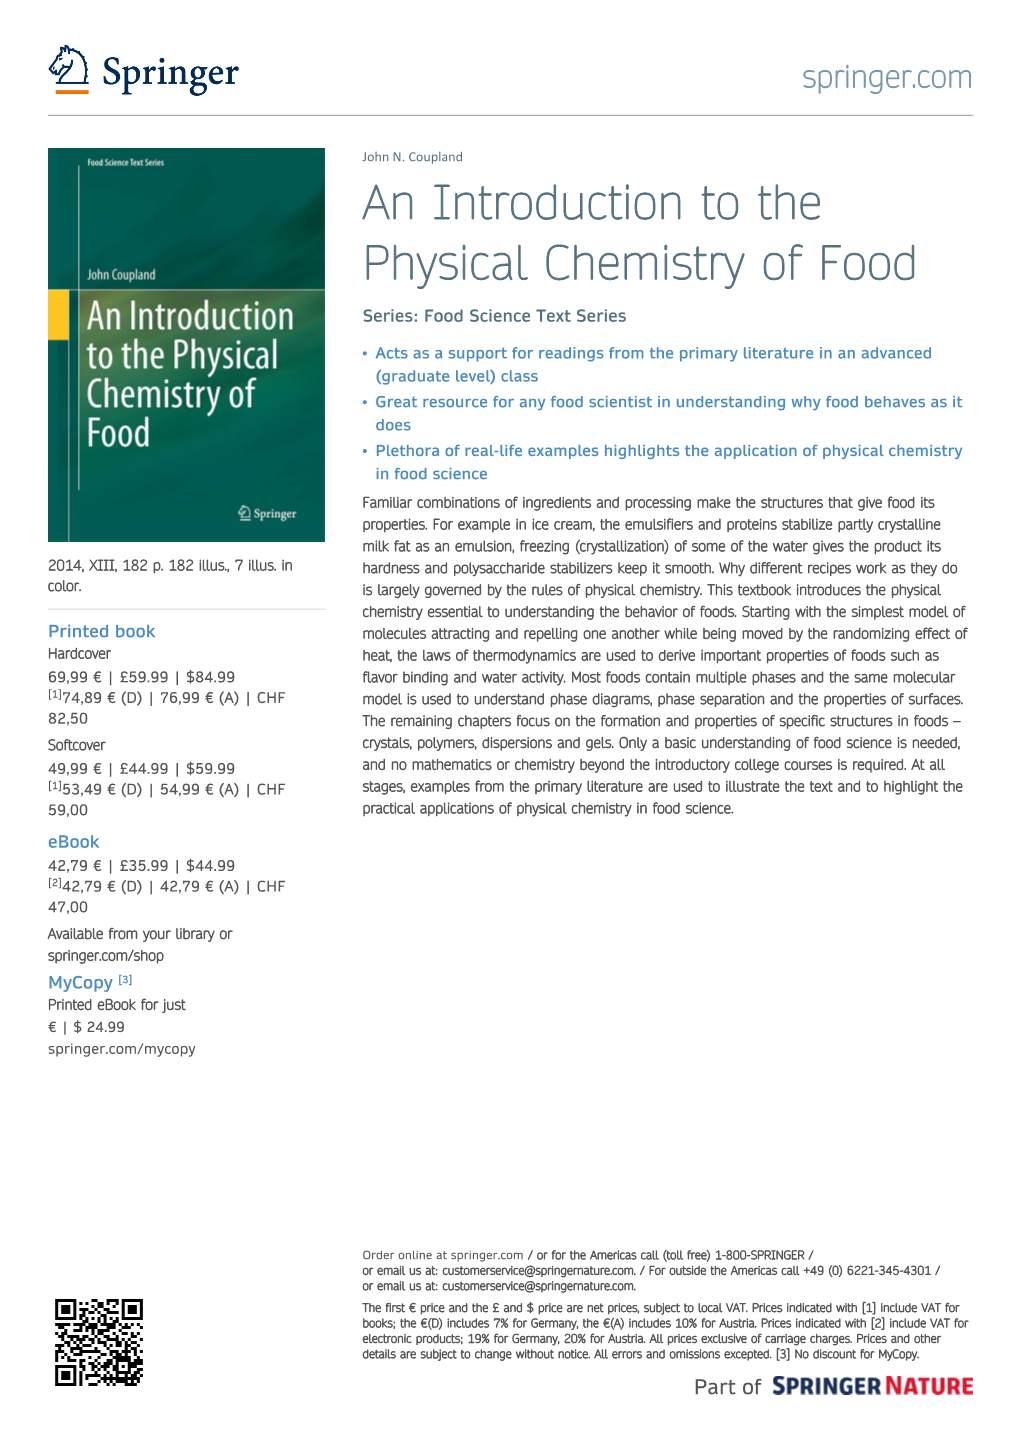 An Introduction to the Physical Chemistry of Food Series: Food Science Text Series